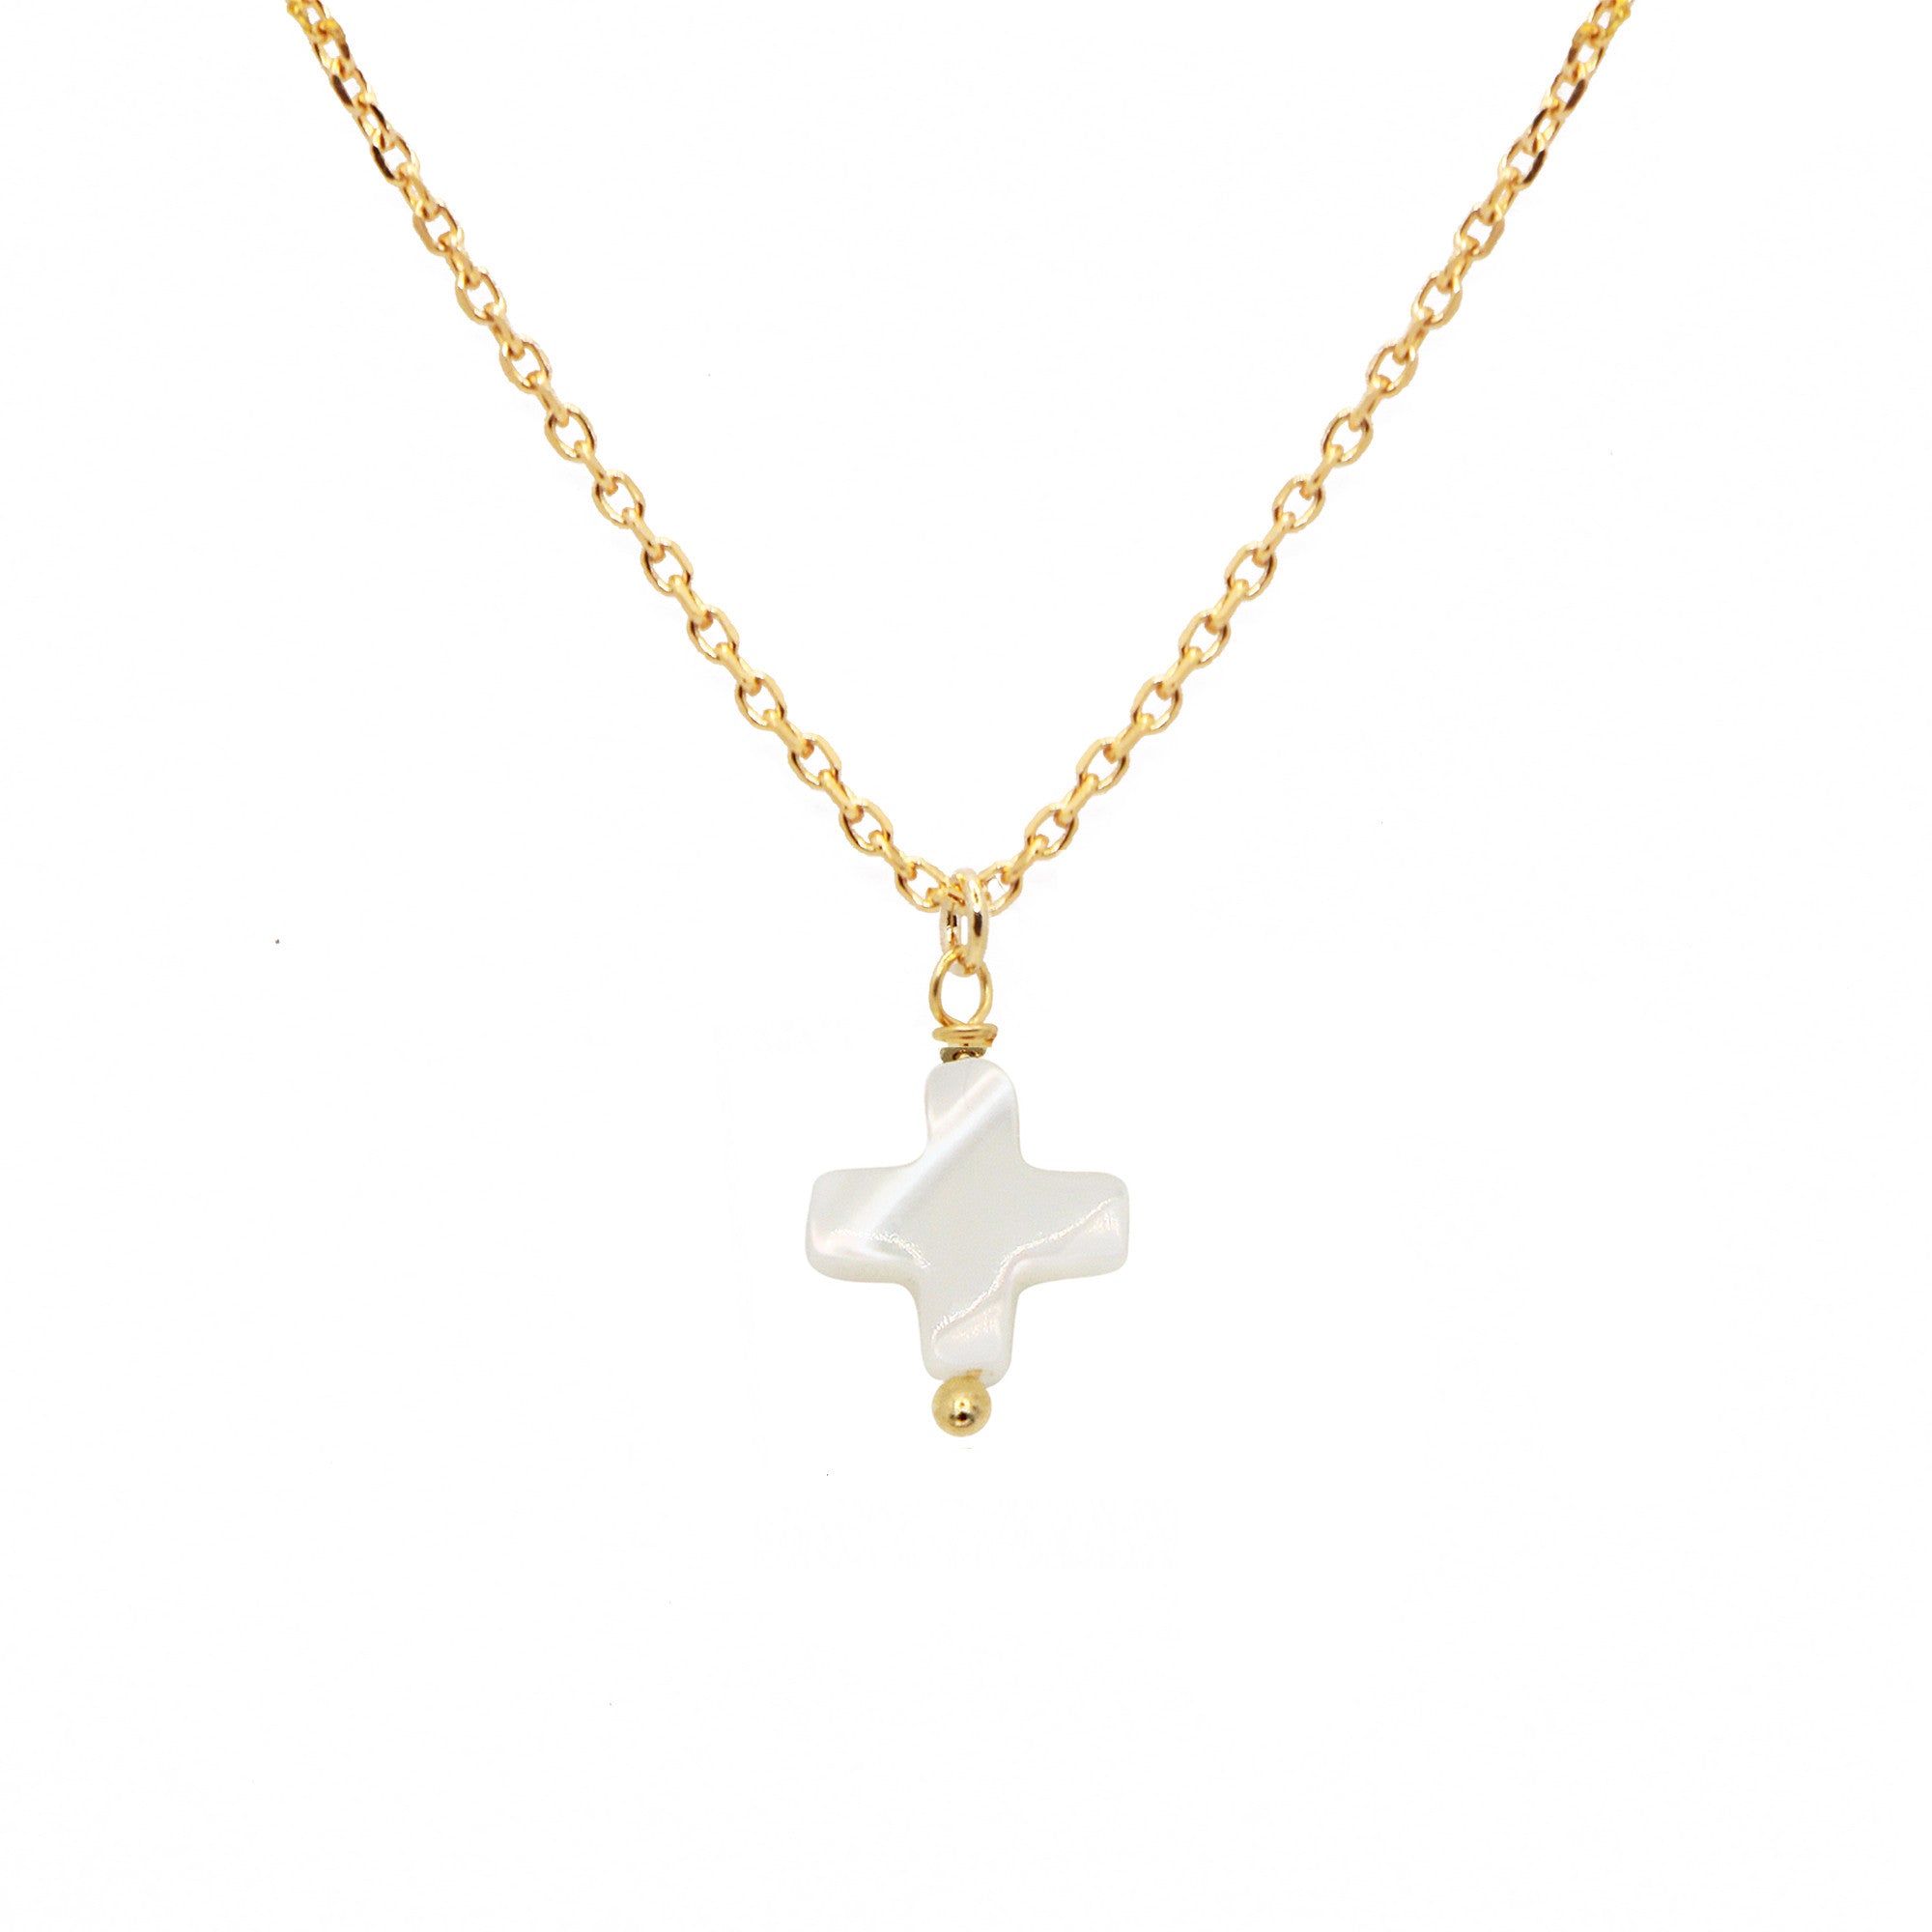 MOTHER-OF-PEARL CROSS NECKLACE